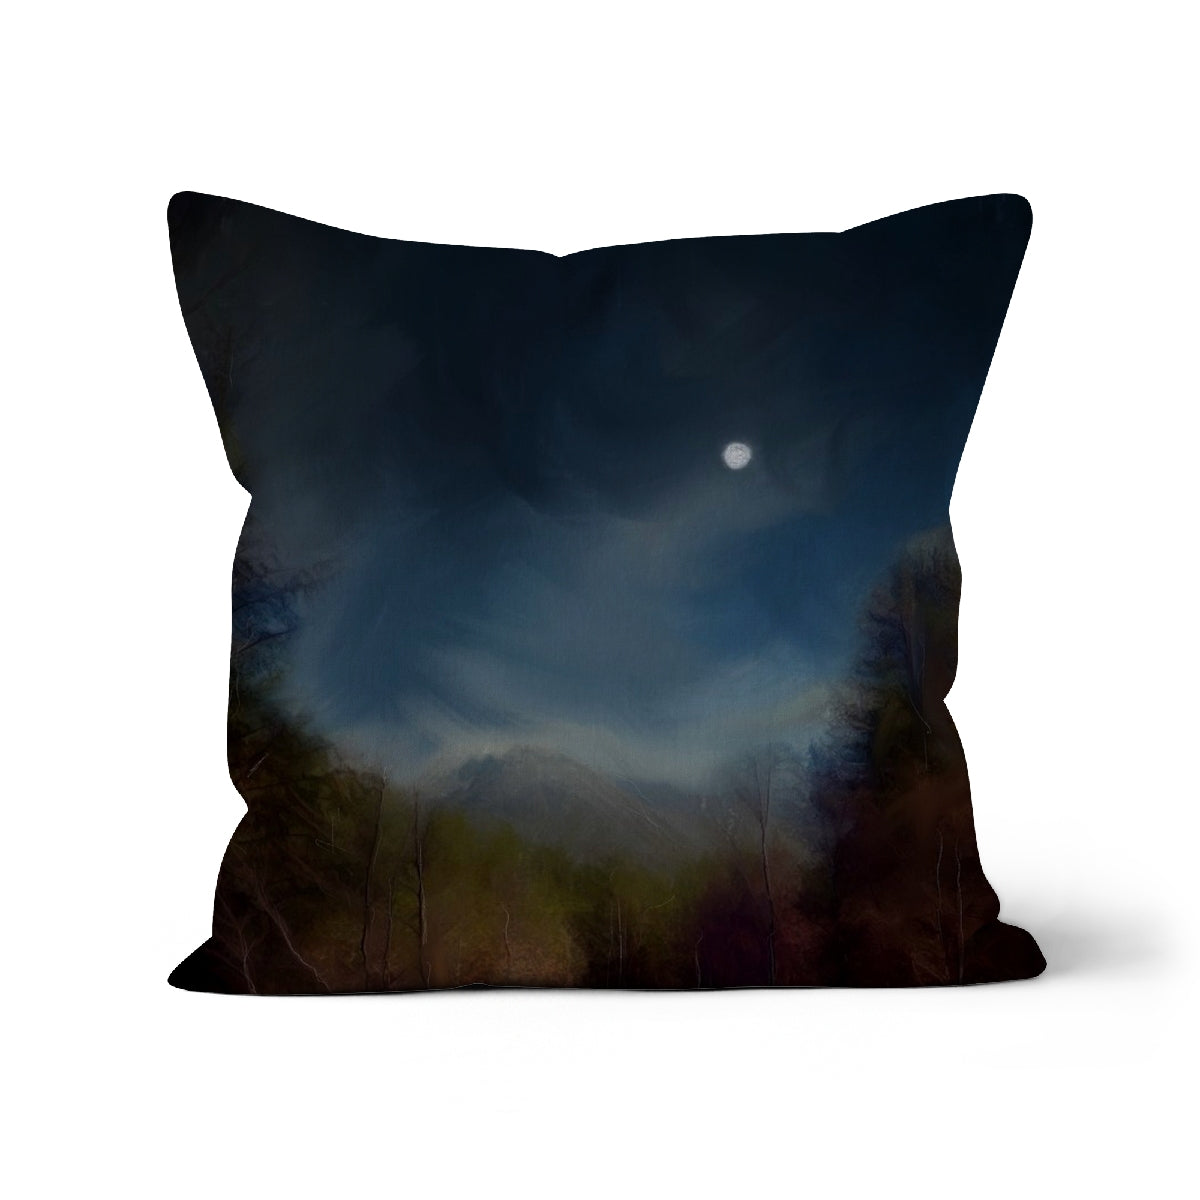 Glencoe Lochan Moonlight Art Gifts Cushion-Cushions-Scottish Lochs & Mountains Art Gallery-Faux Suede-12"x12"-Paintings, Prints, Homeware, Art Gifts From Scotland By Scottish Artist Kevin Hunter